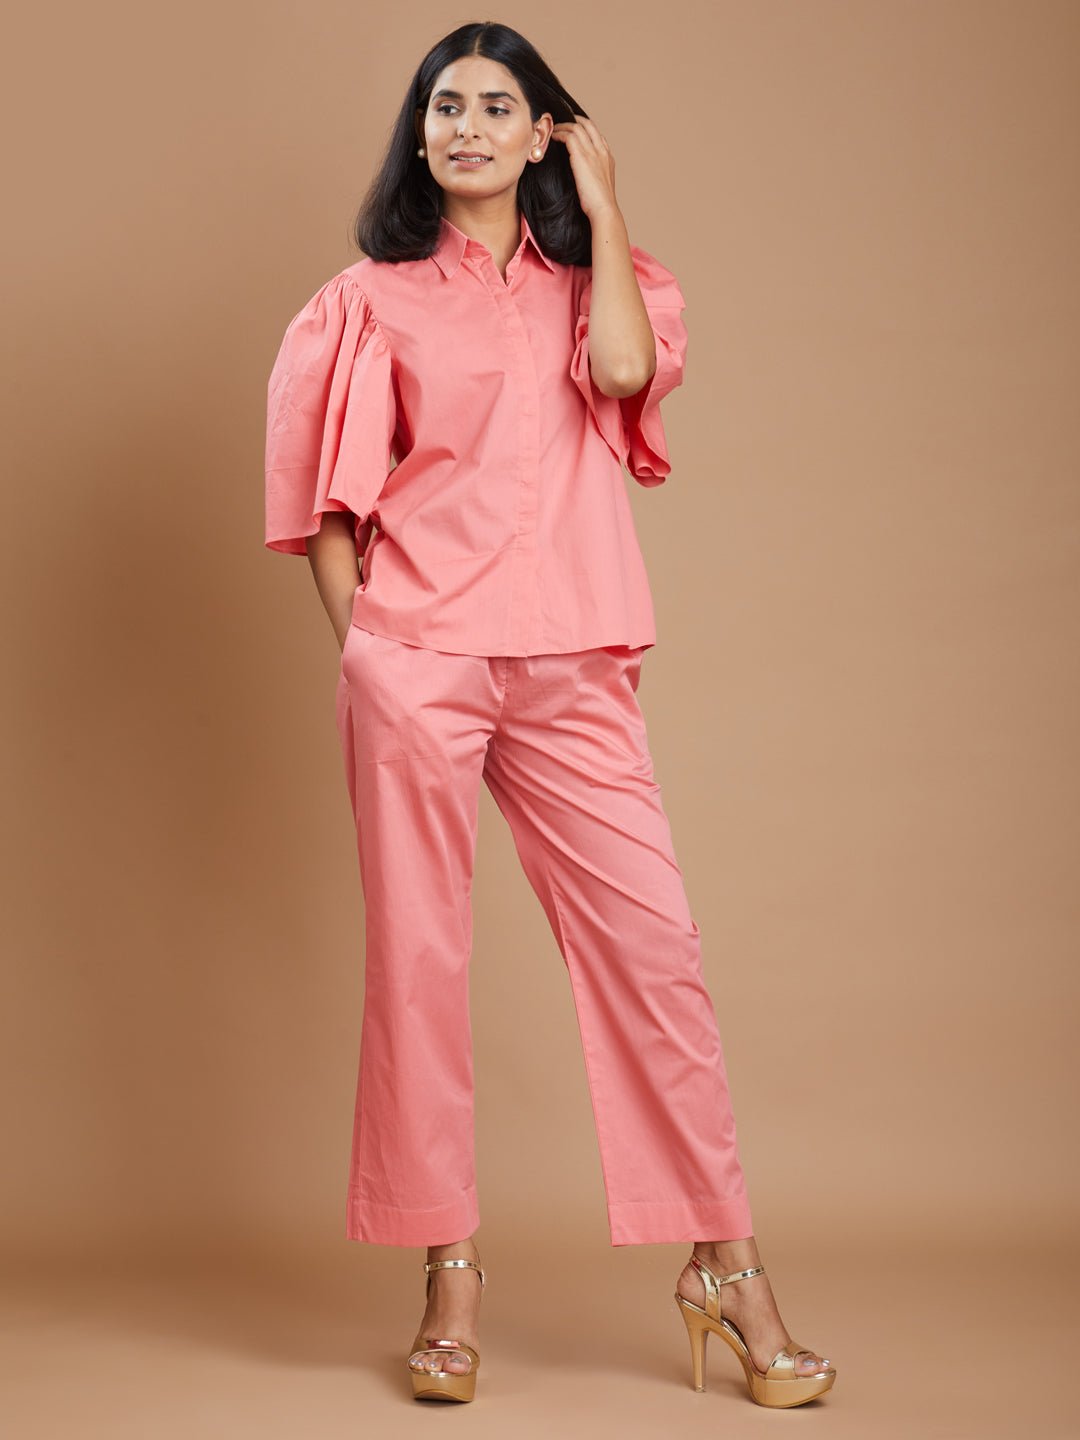 HEATHER - Pink Co-ord Set in Cotton Poplin